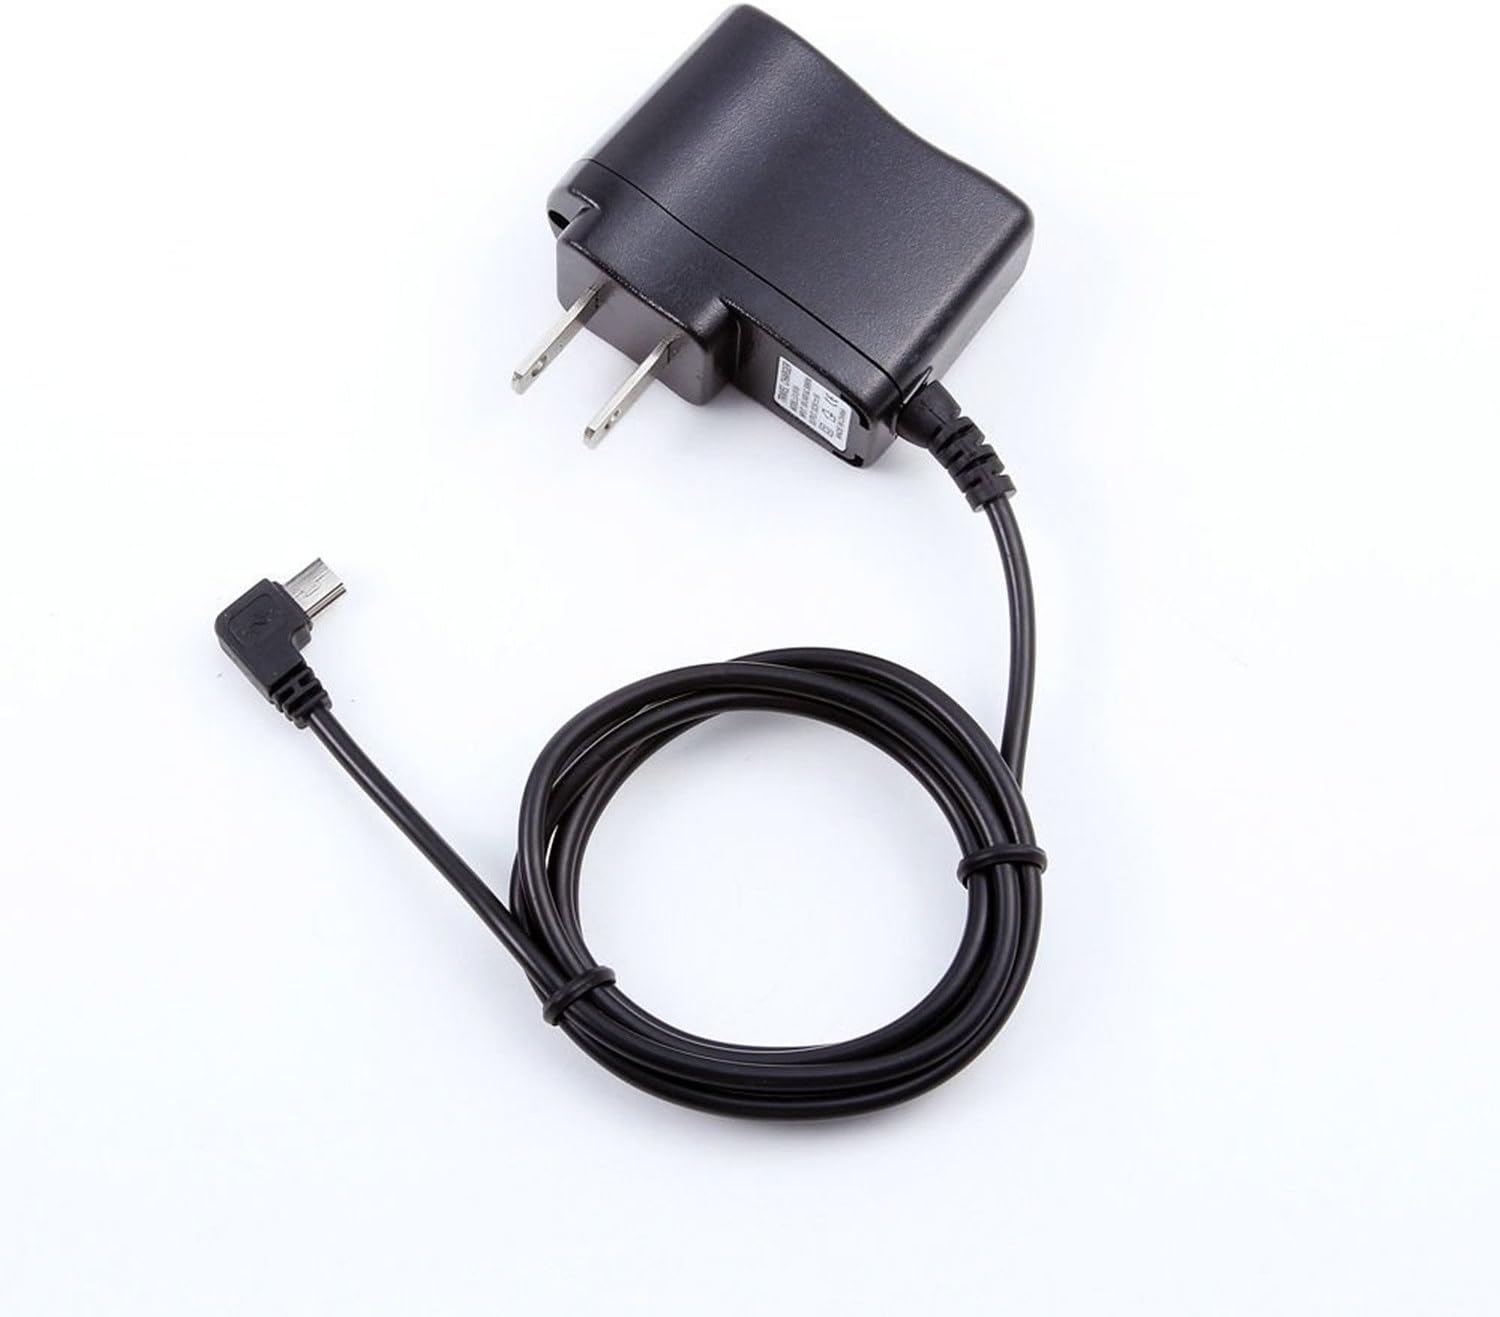 Power Supply Adapter for Zoom Recorders H1, H2n, H5, H6, Q2HD, Q4, R8 AC Adapter Wall Charger Connectivity Technology M